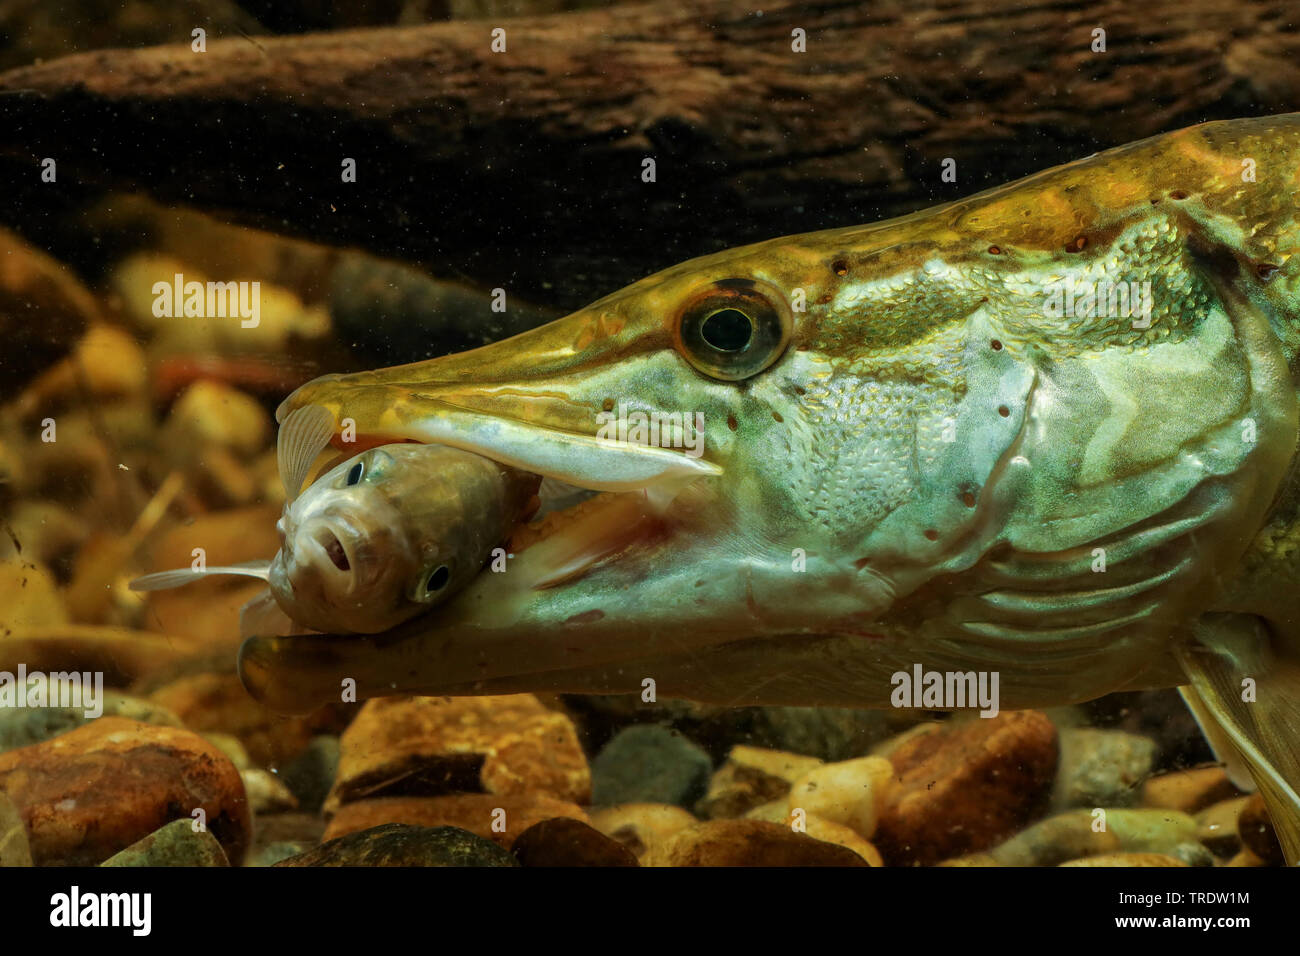 pike, northern pike (Esox lucius), with preyed Giebel carp in the mouth, portrait, Germany, 1 Stock Photo